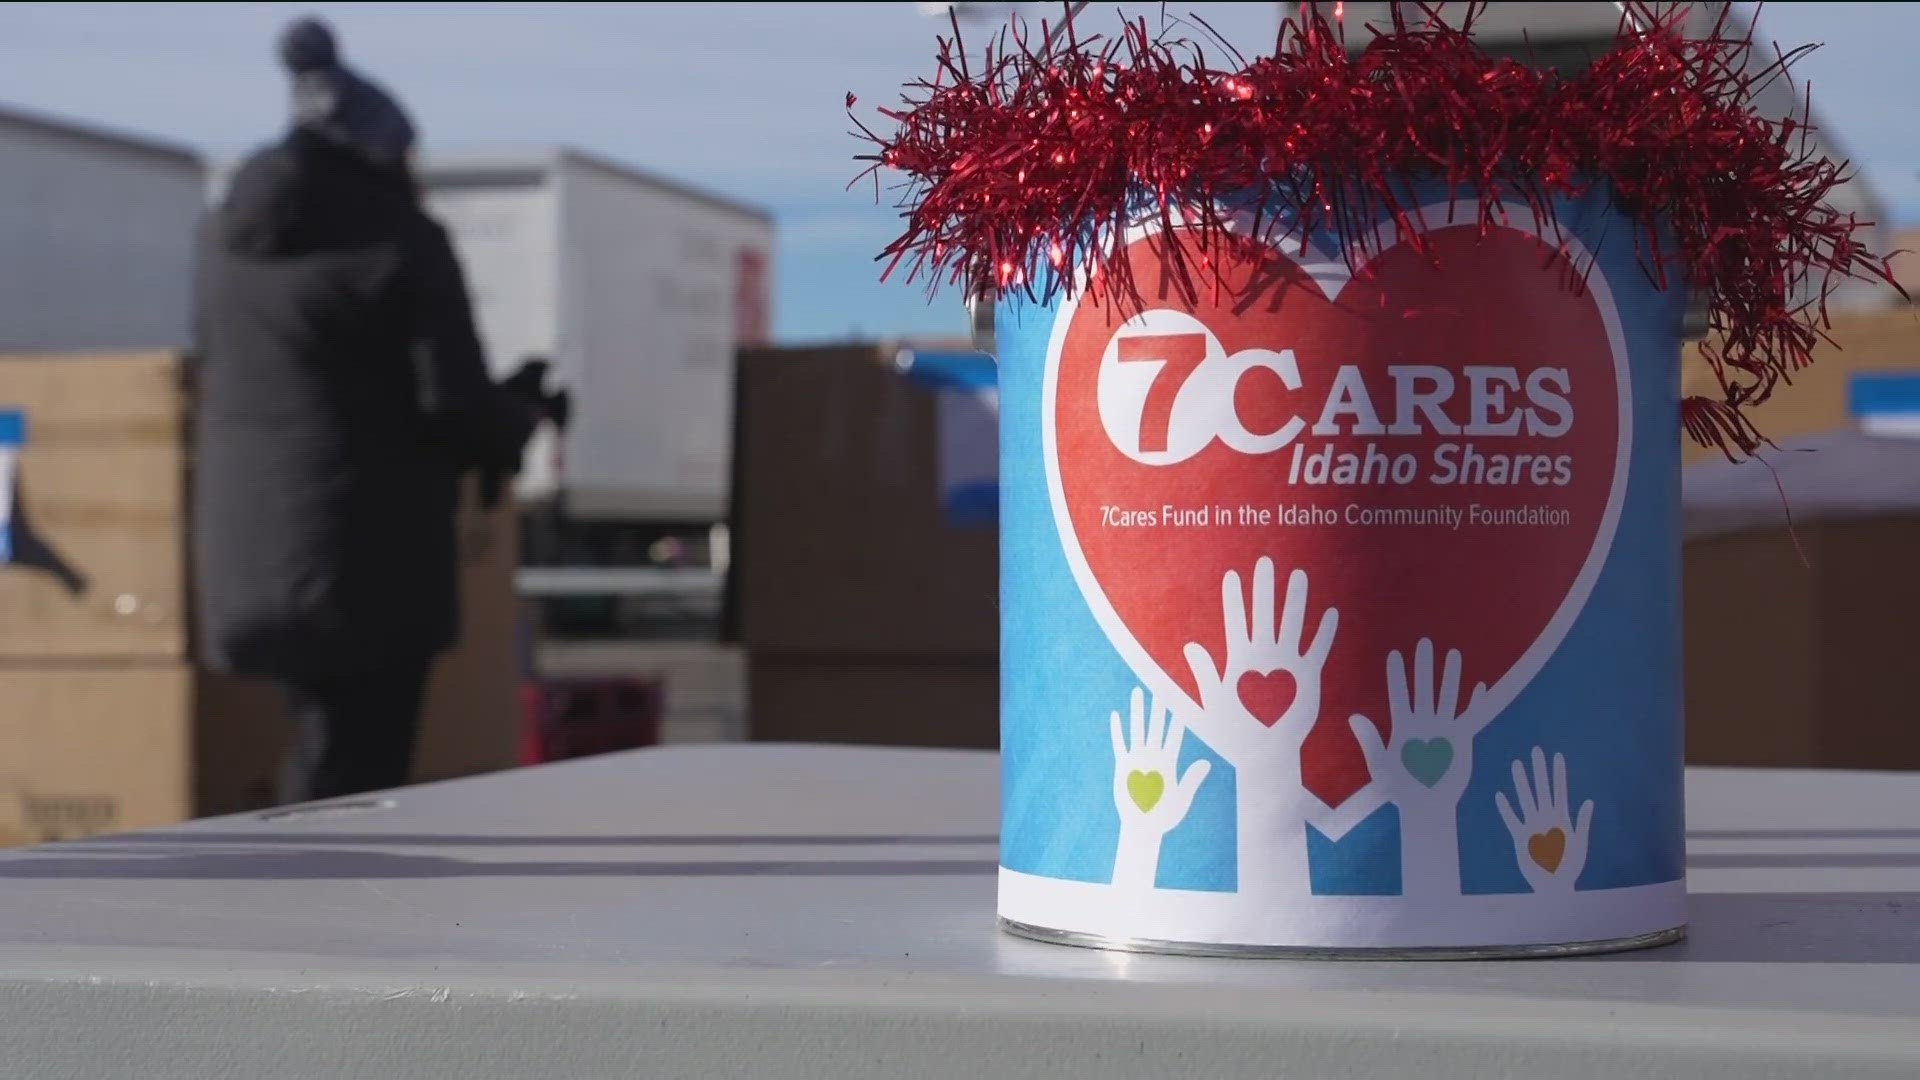 The community and companies come together to give during the holidays.